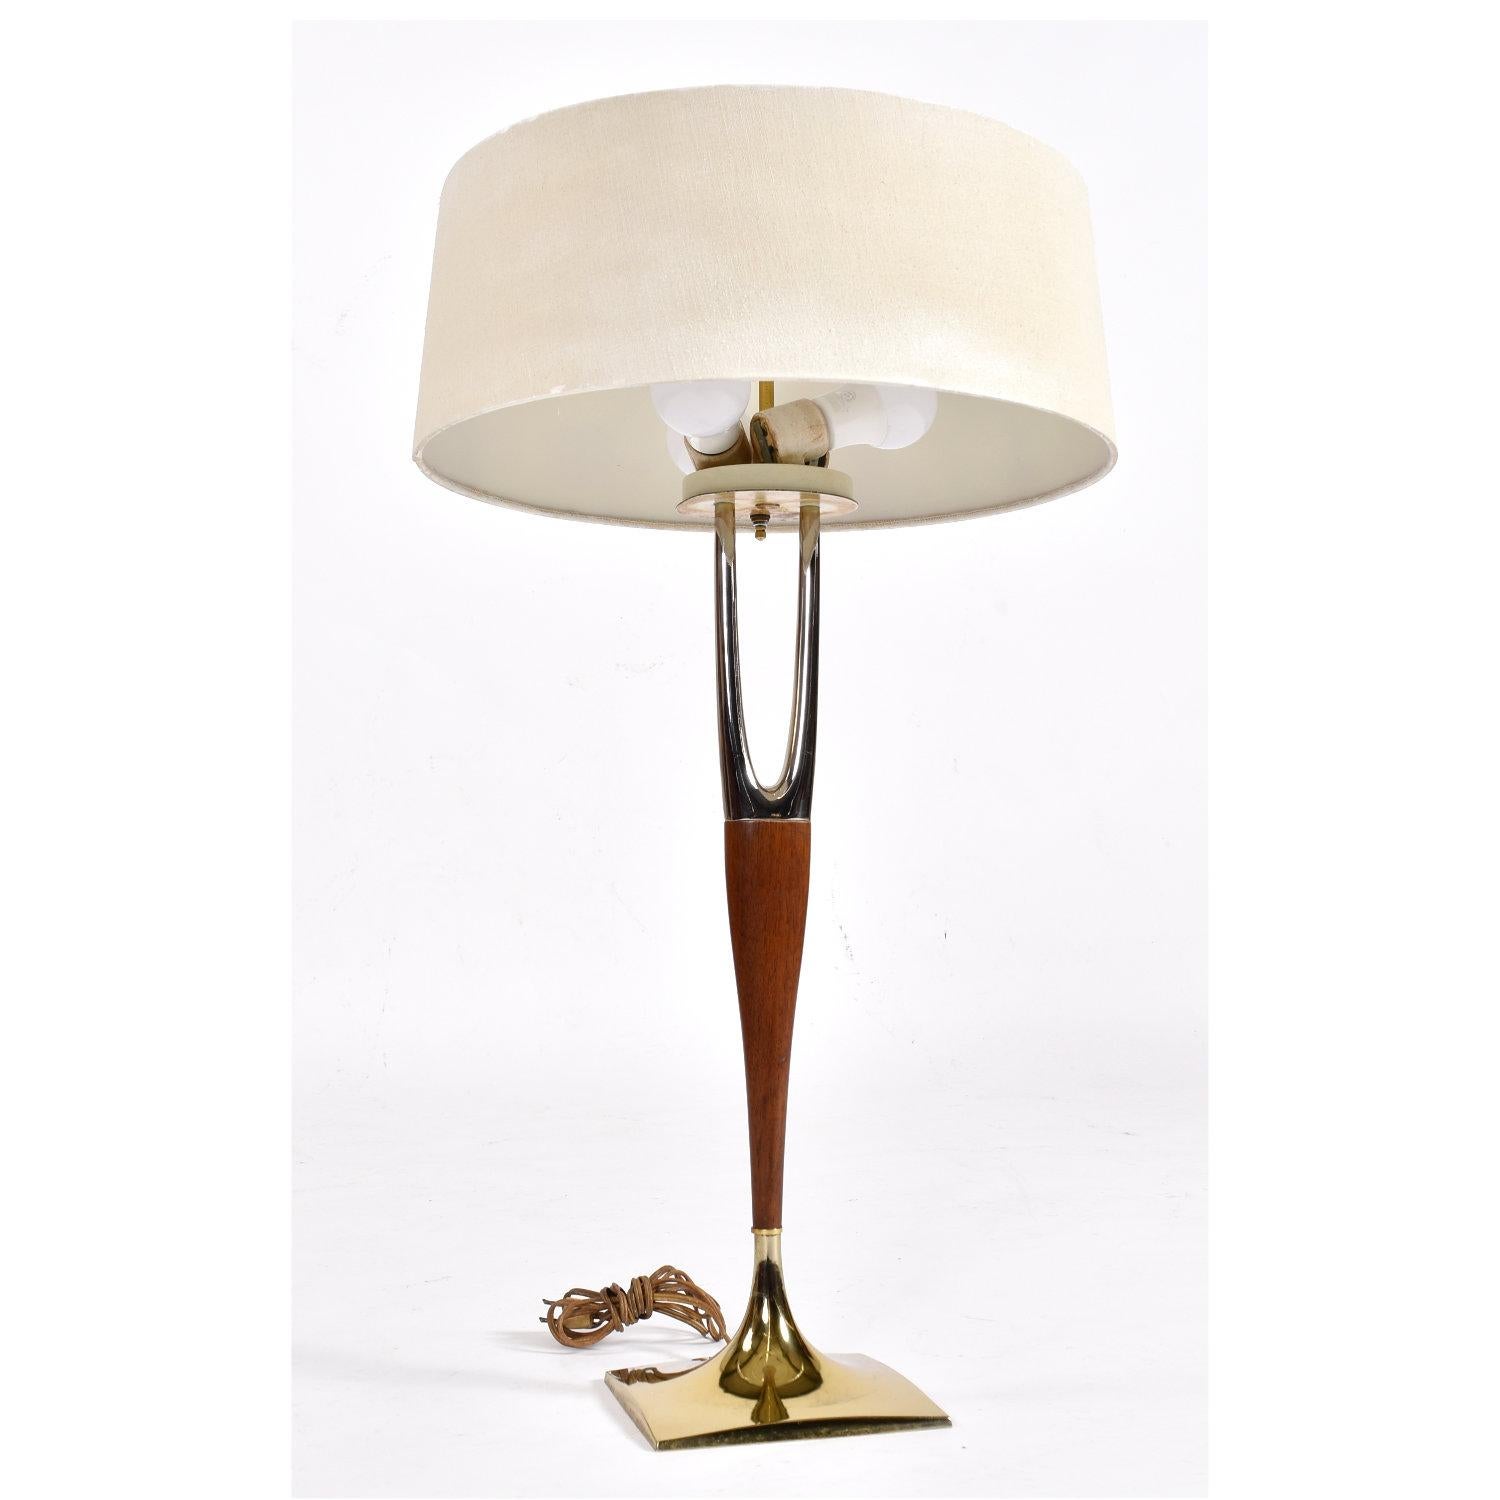 Gerald Thurston Mid-Century Modern Wishbone Lamp with Original Shade In Good Condition For Sale In Chattanooga, TN